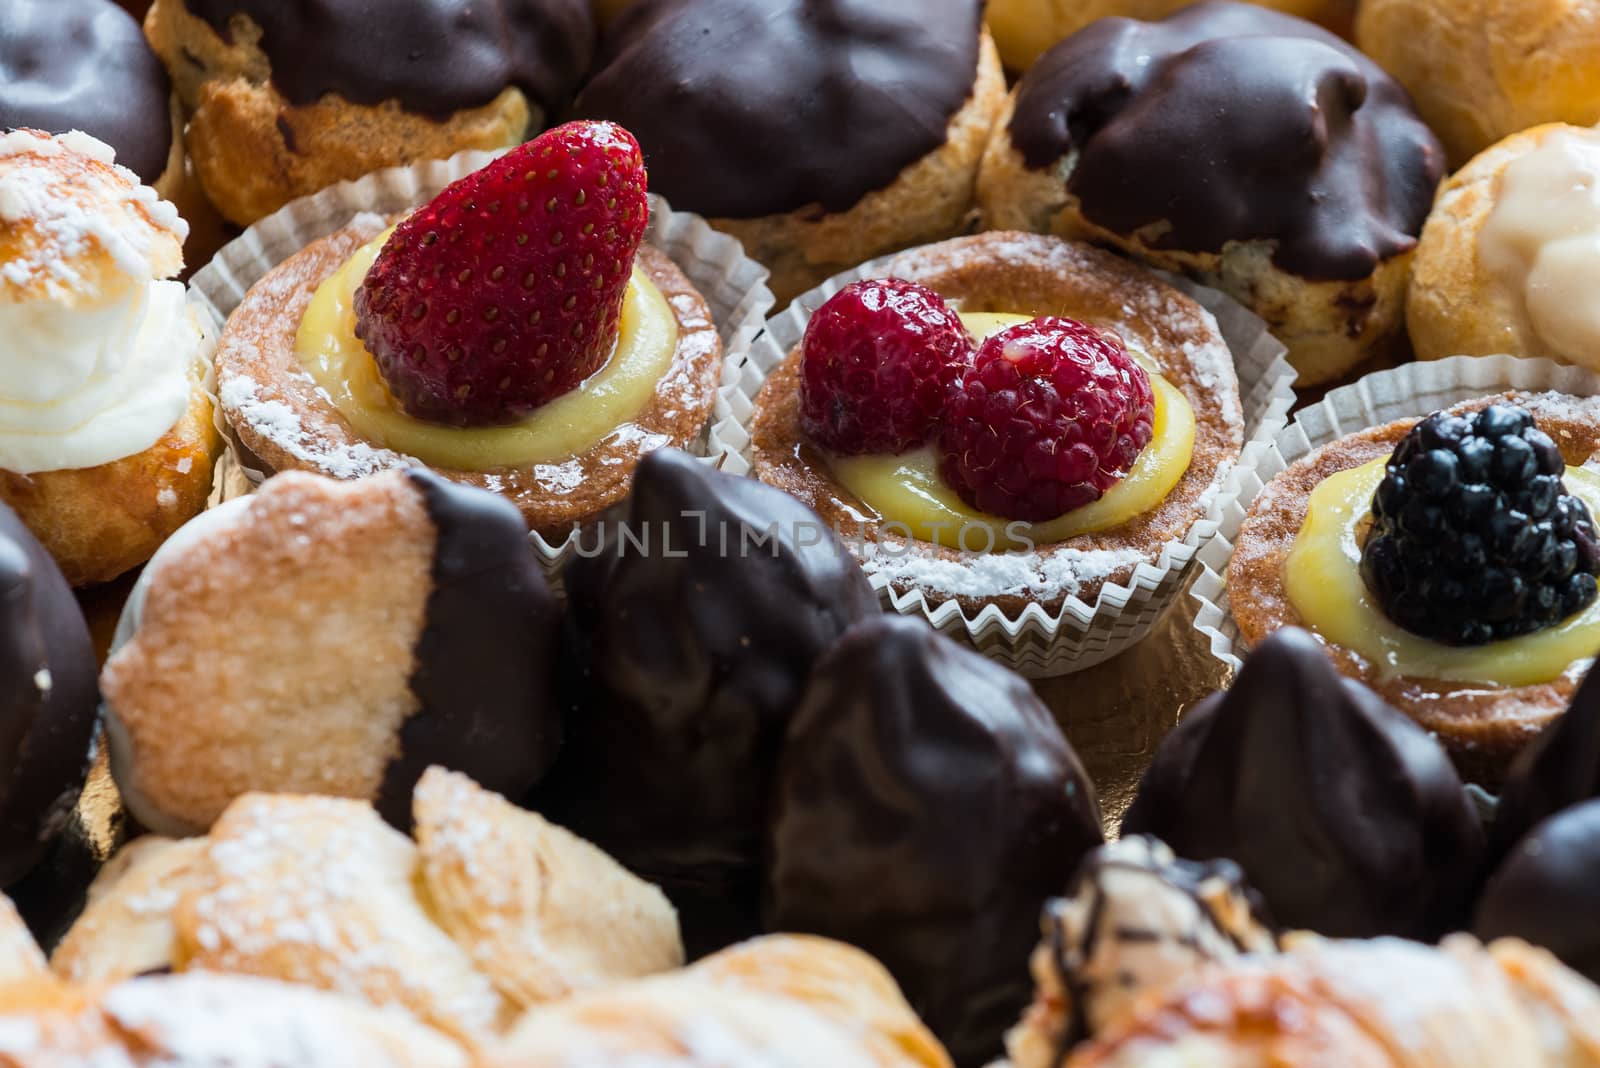 A nice view of typical italian pastries.